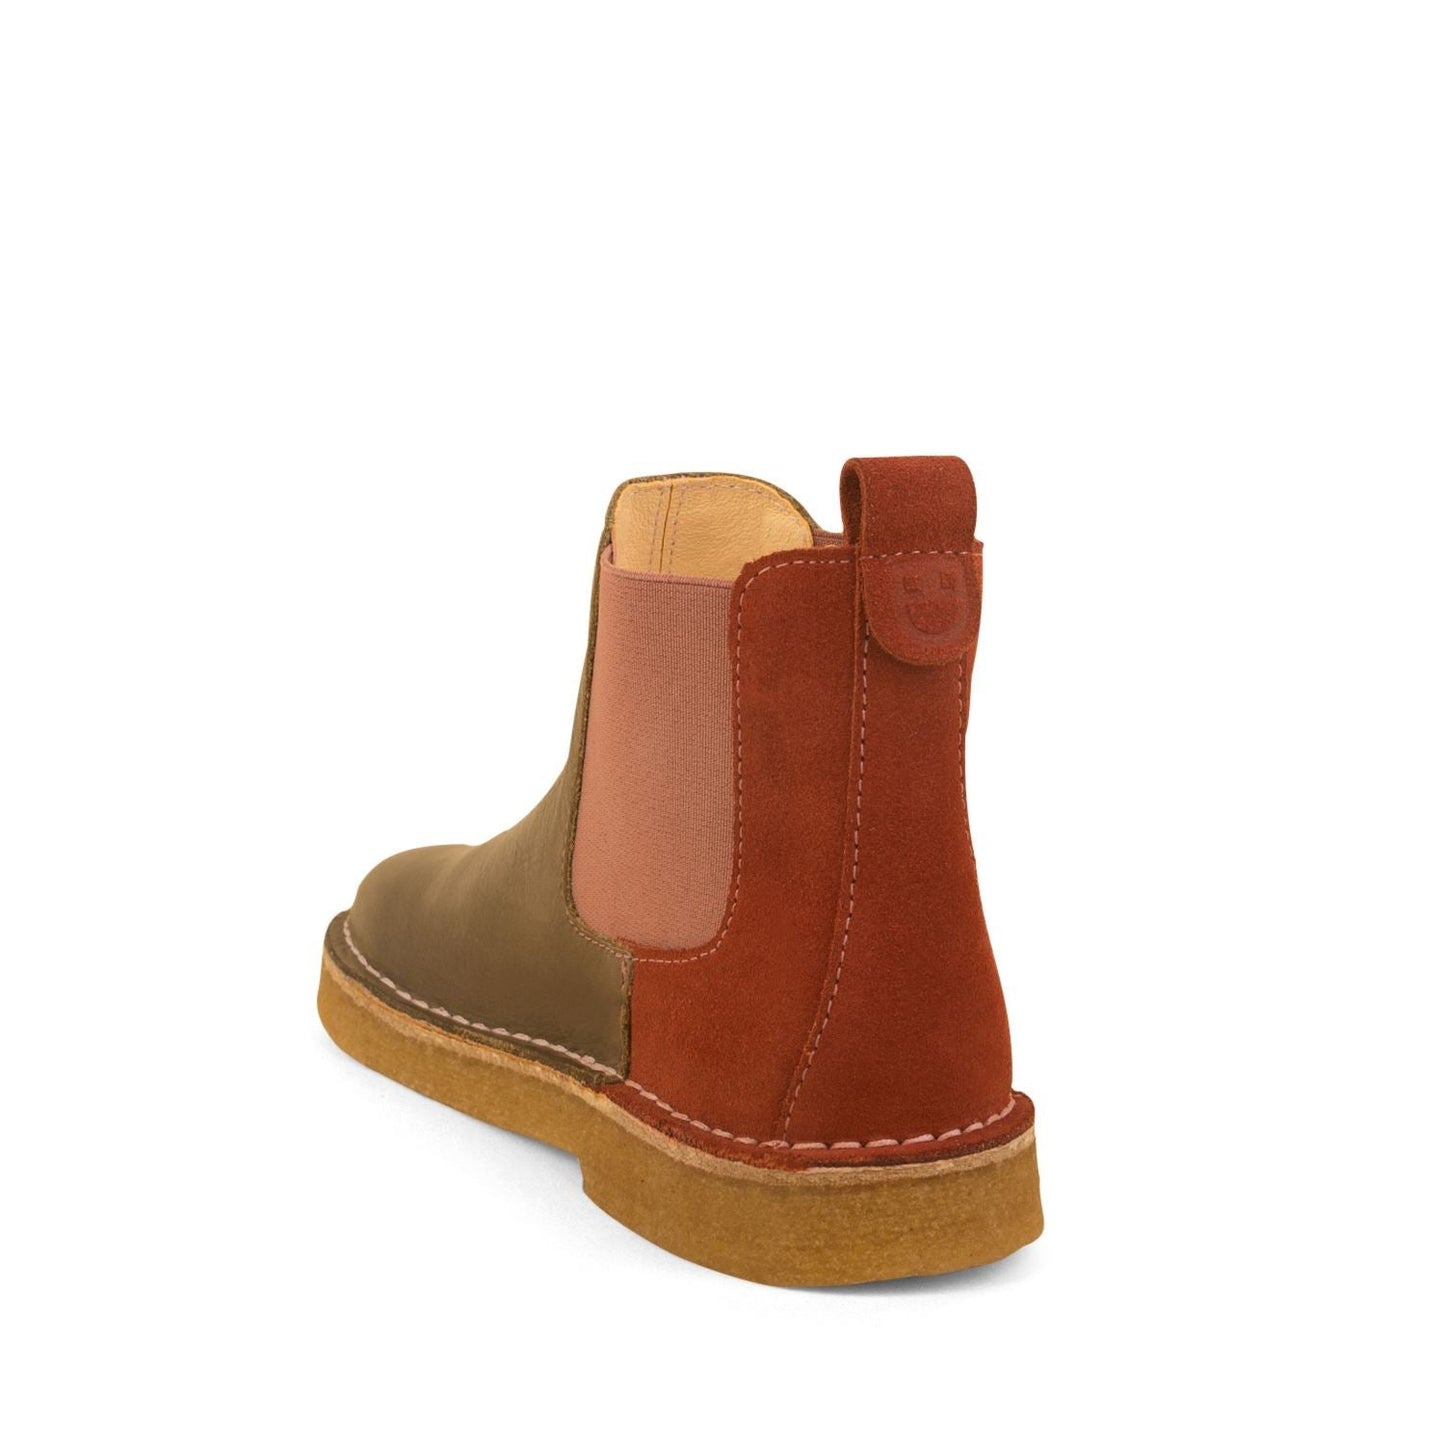 Olive Chelsea Boot Shoes Dulis Shoes 